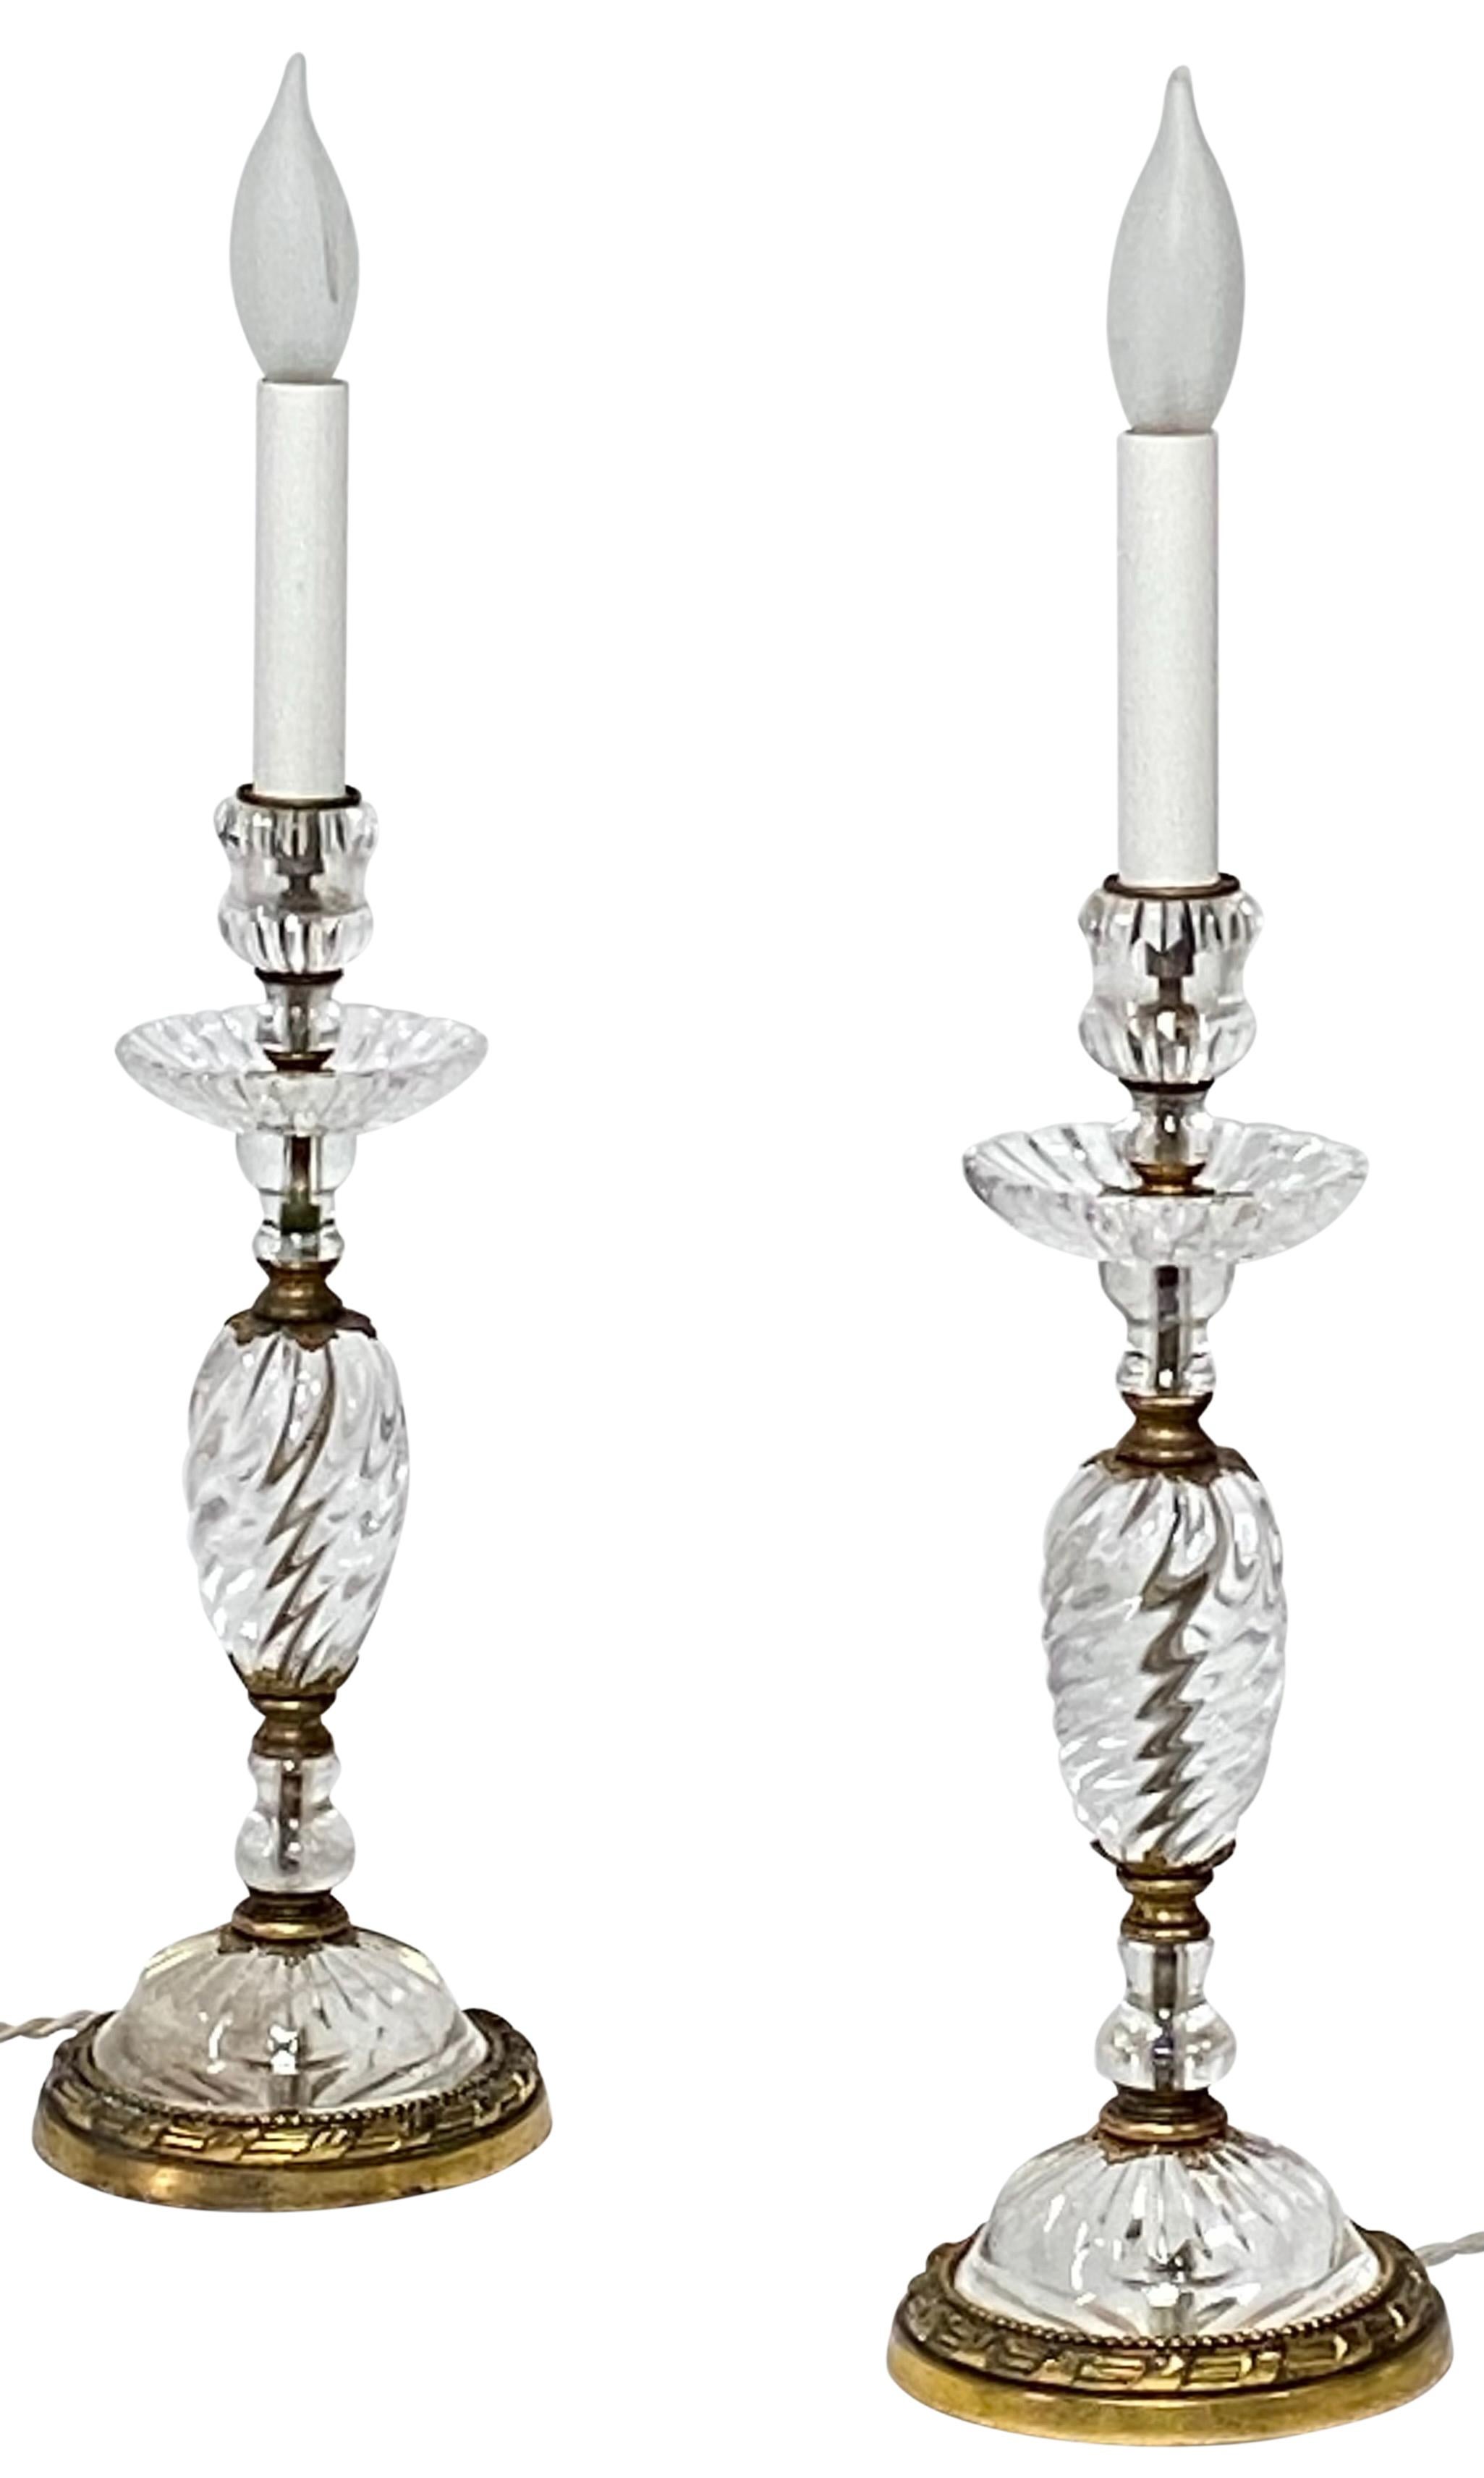 Pair of Early 19th Century French Rock Crystal Candle Stick Boudoir Lamps For Sale 1